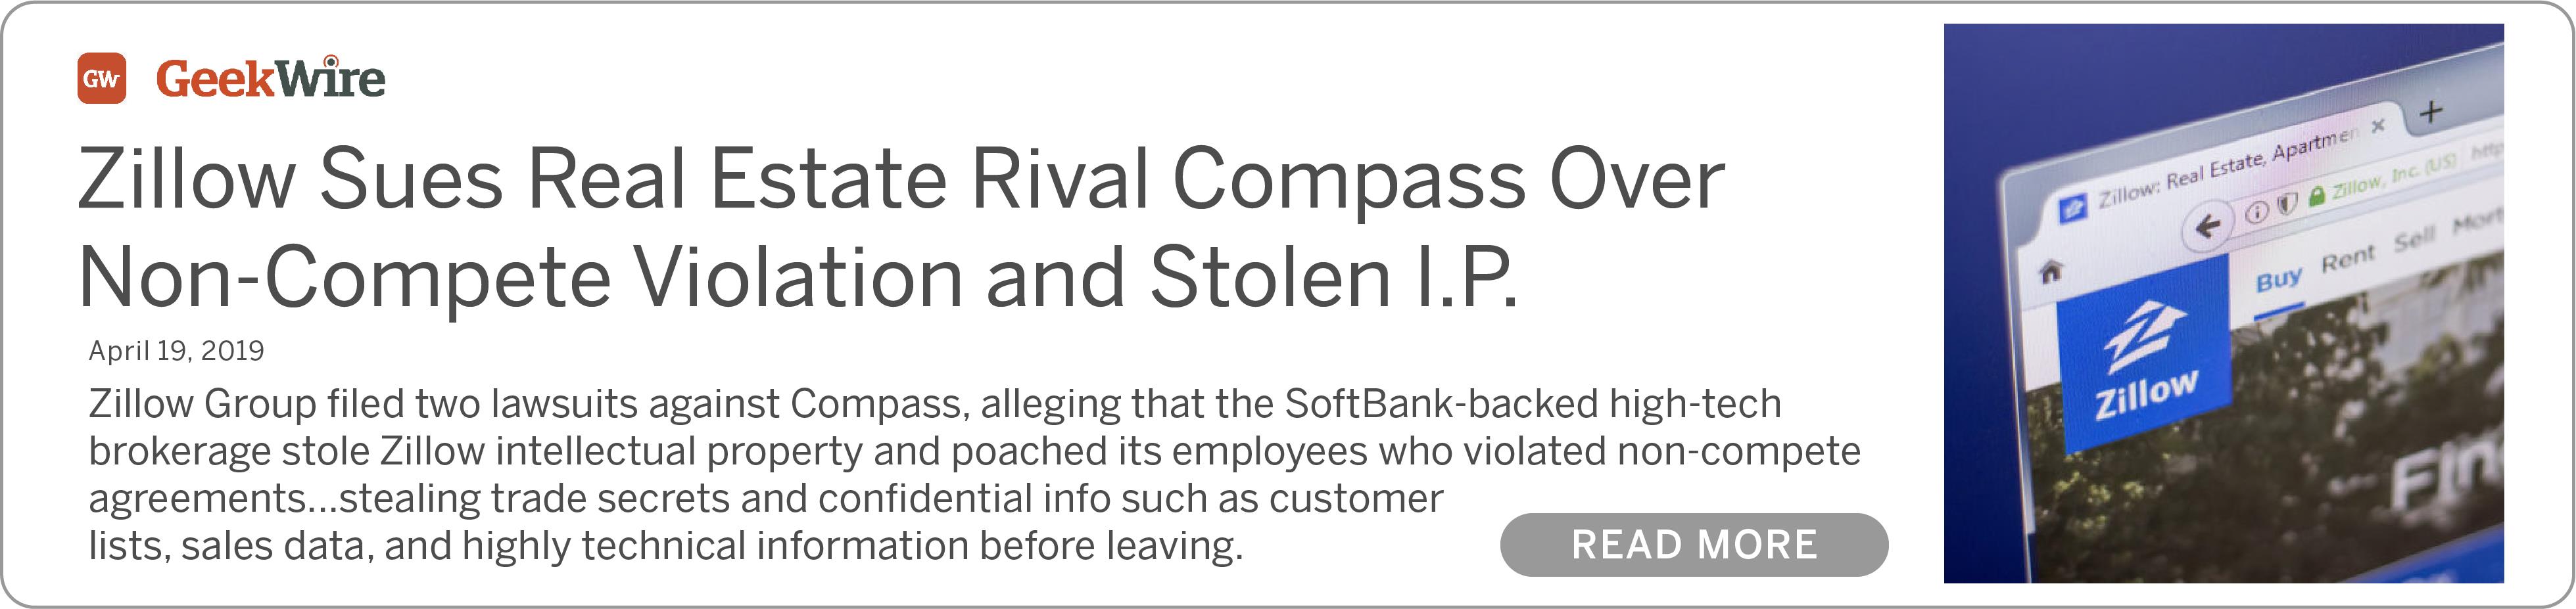 Zillow Sues Real Estate Rival Compass Over Non-Compete Violation and Stolen I.P.